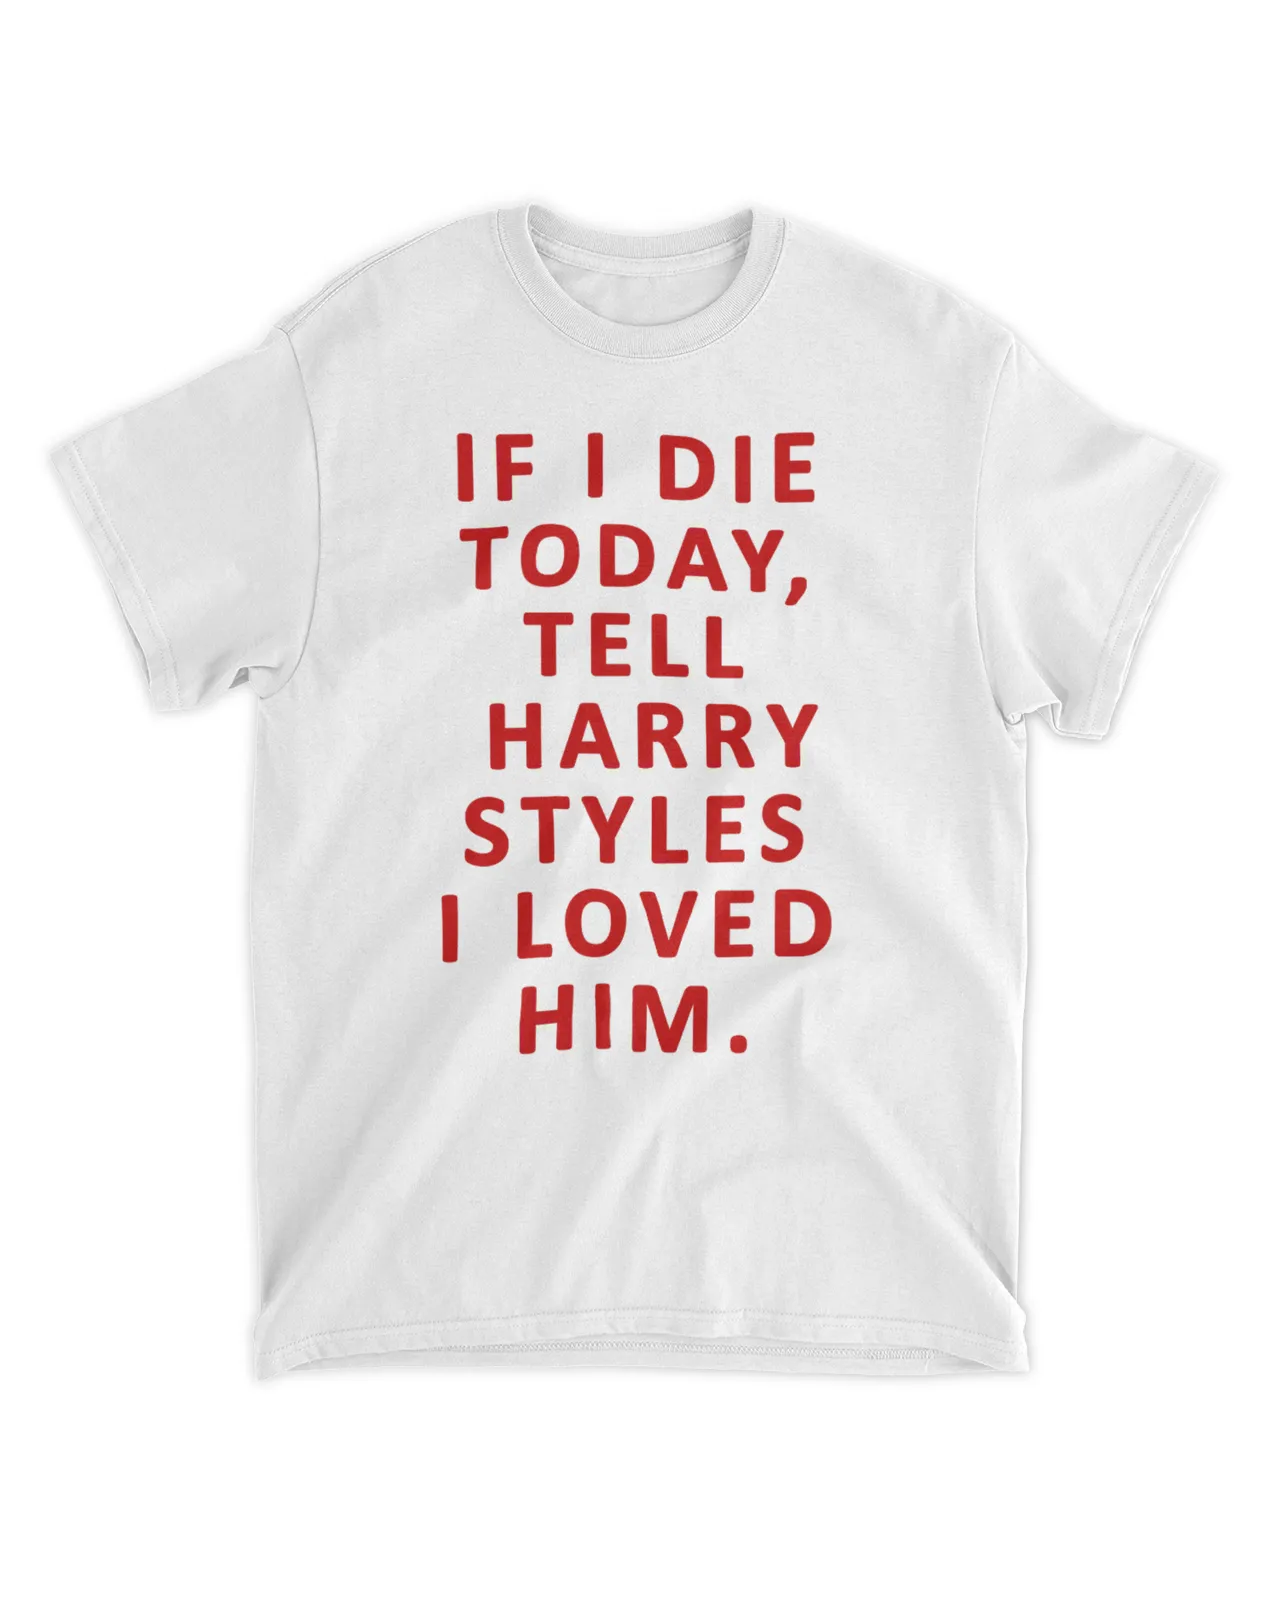  If I die today tell Harry Styles I loved him shirt